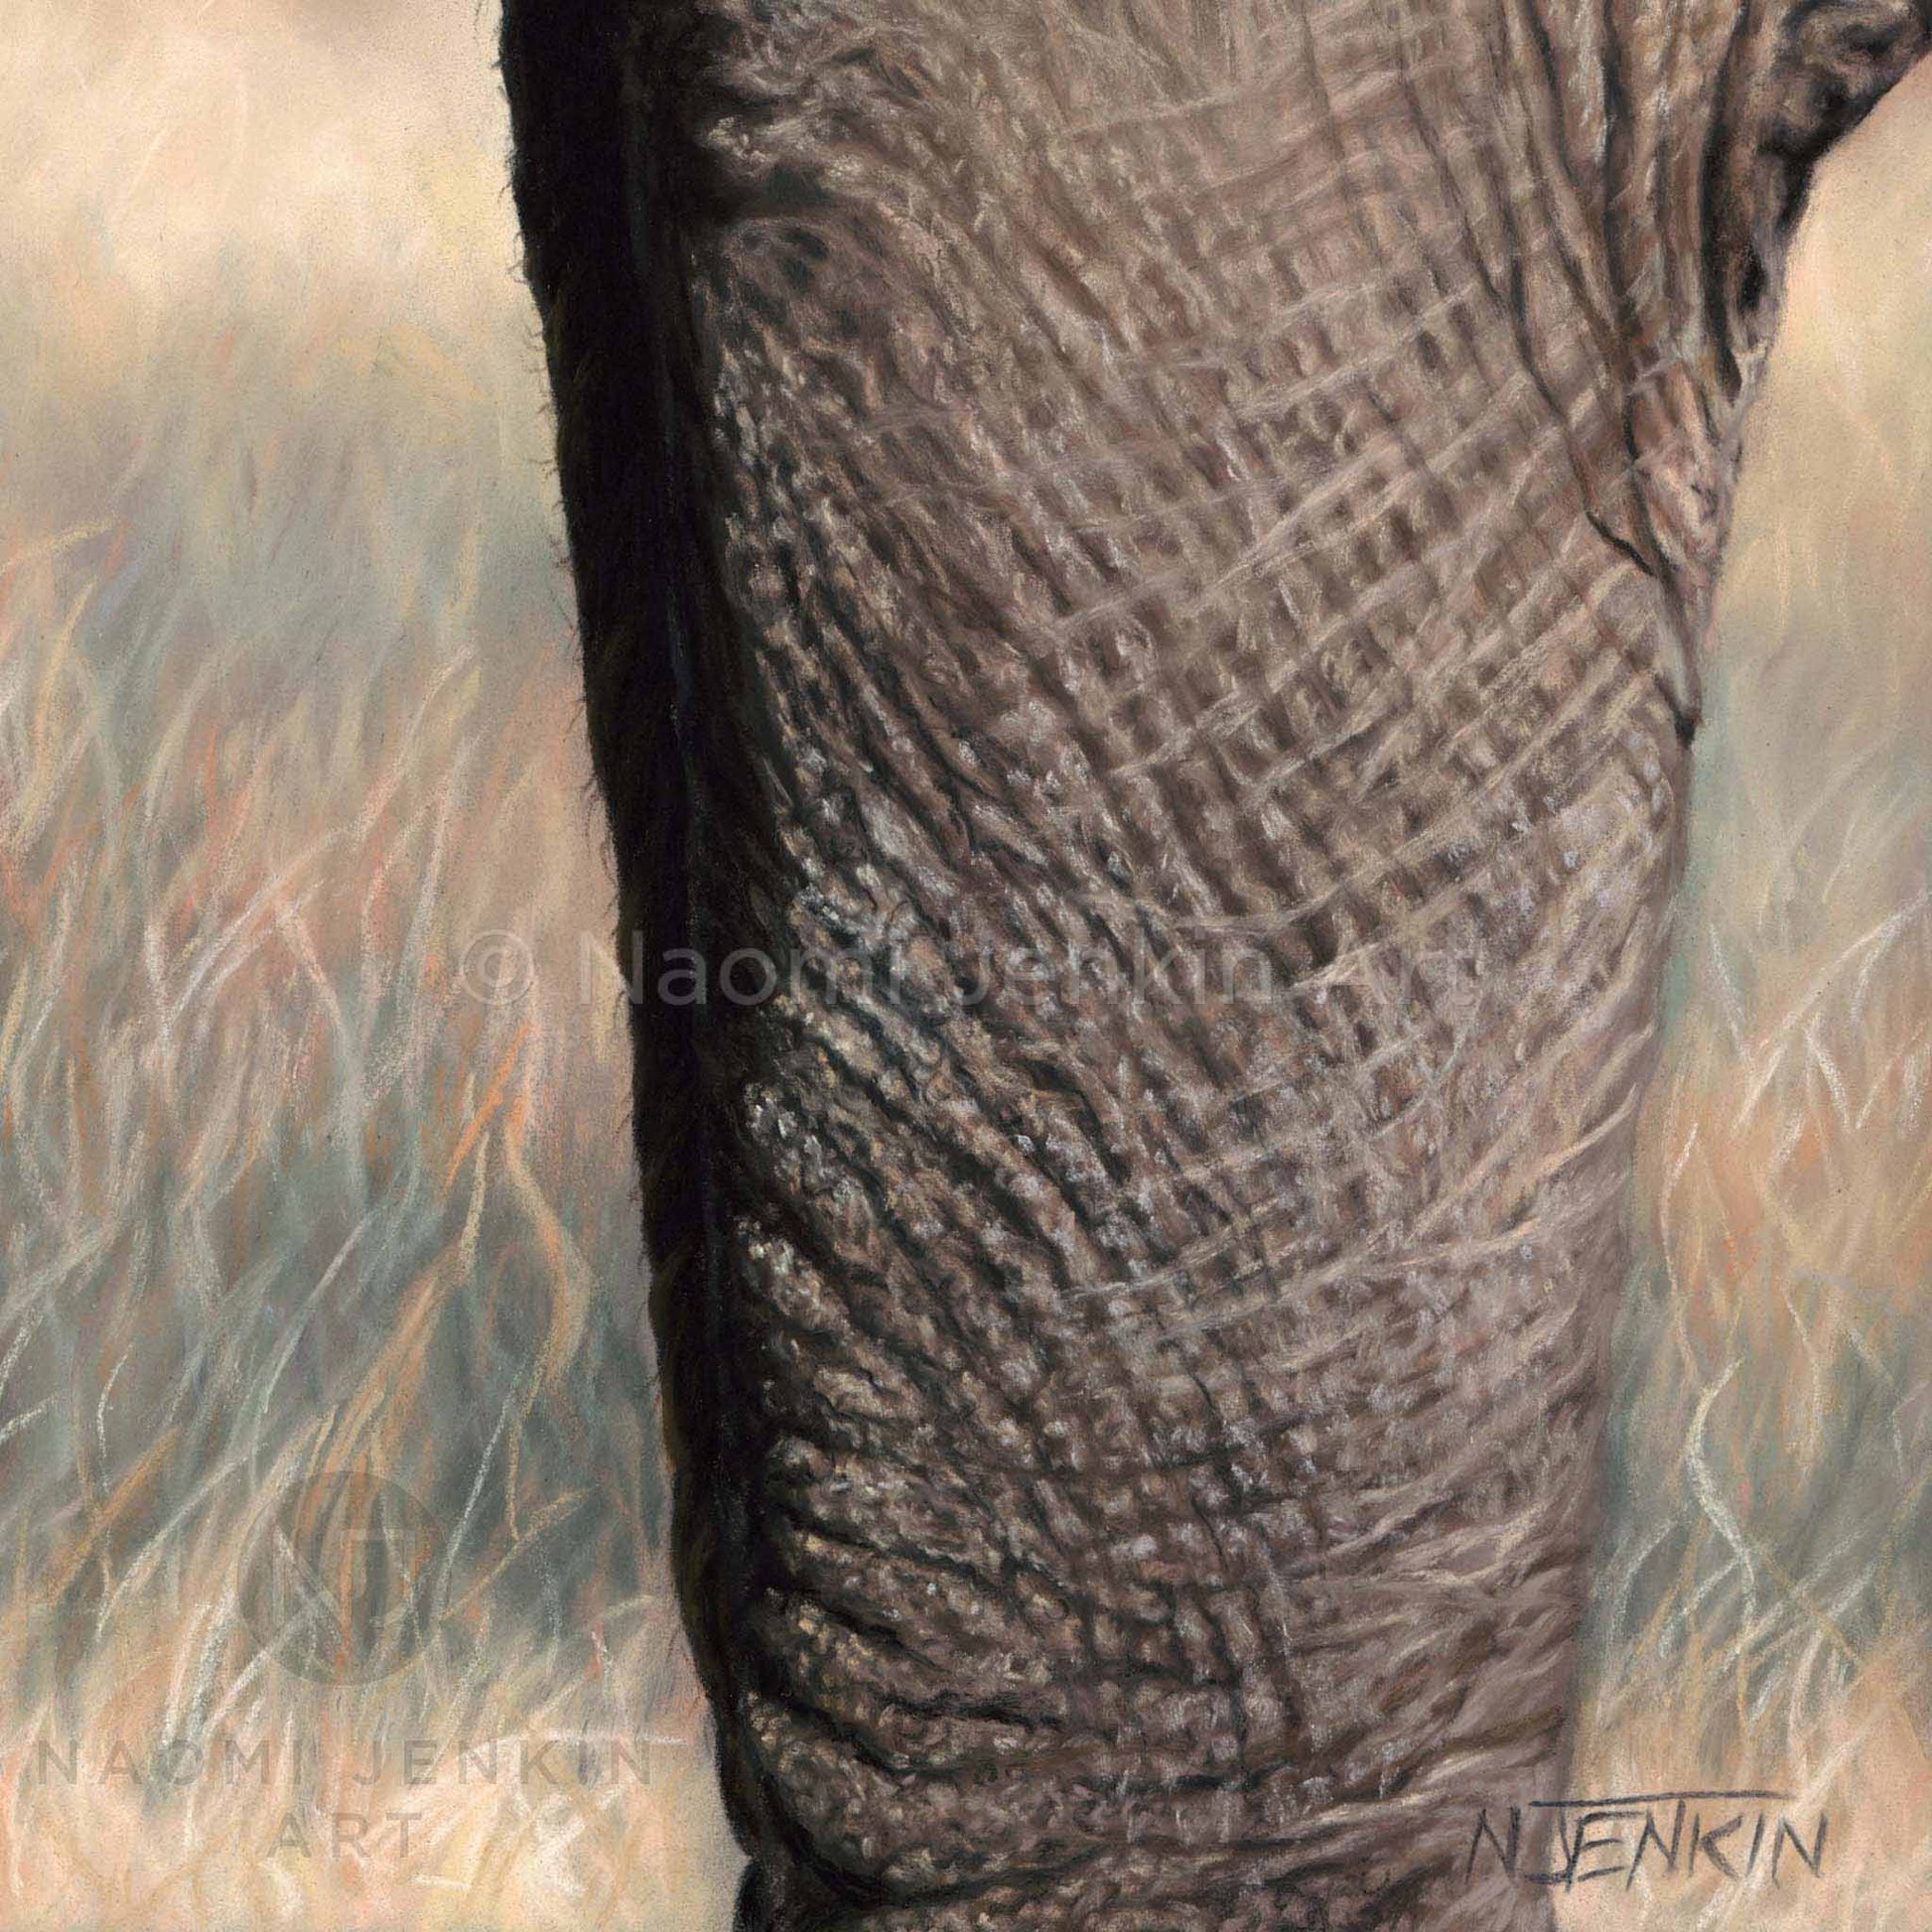 Close up elephant leg drawing from the print 'Little and Large' by Naomi Jenkin